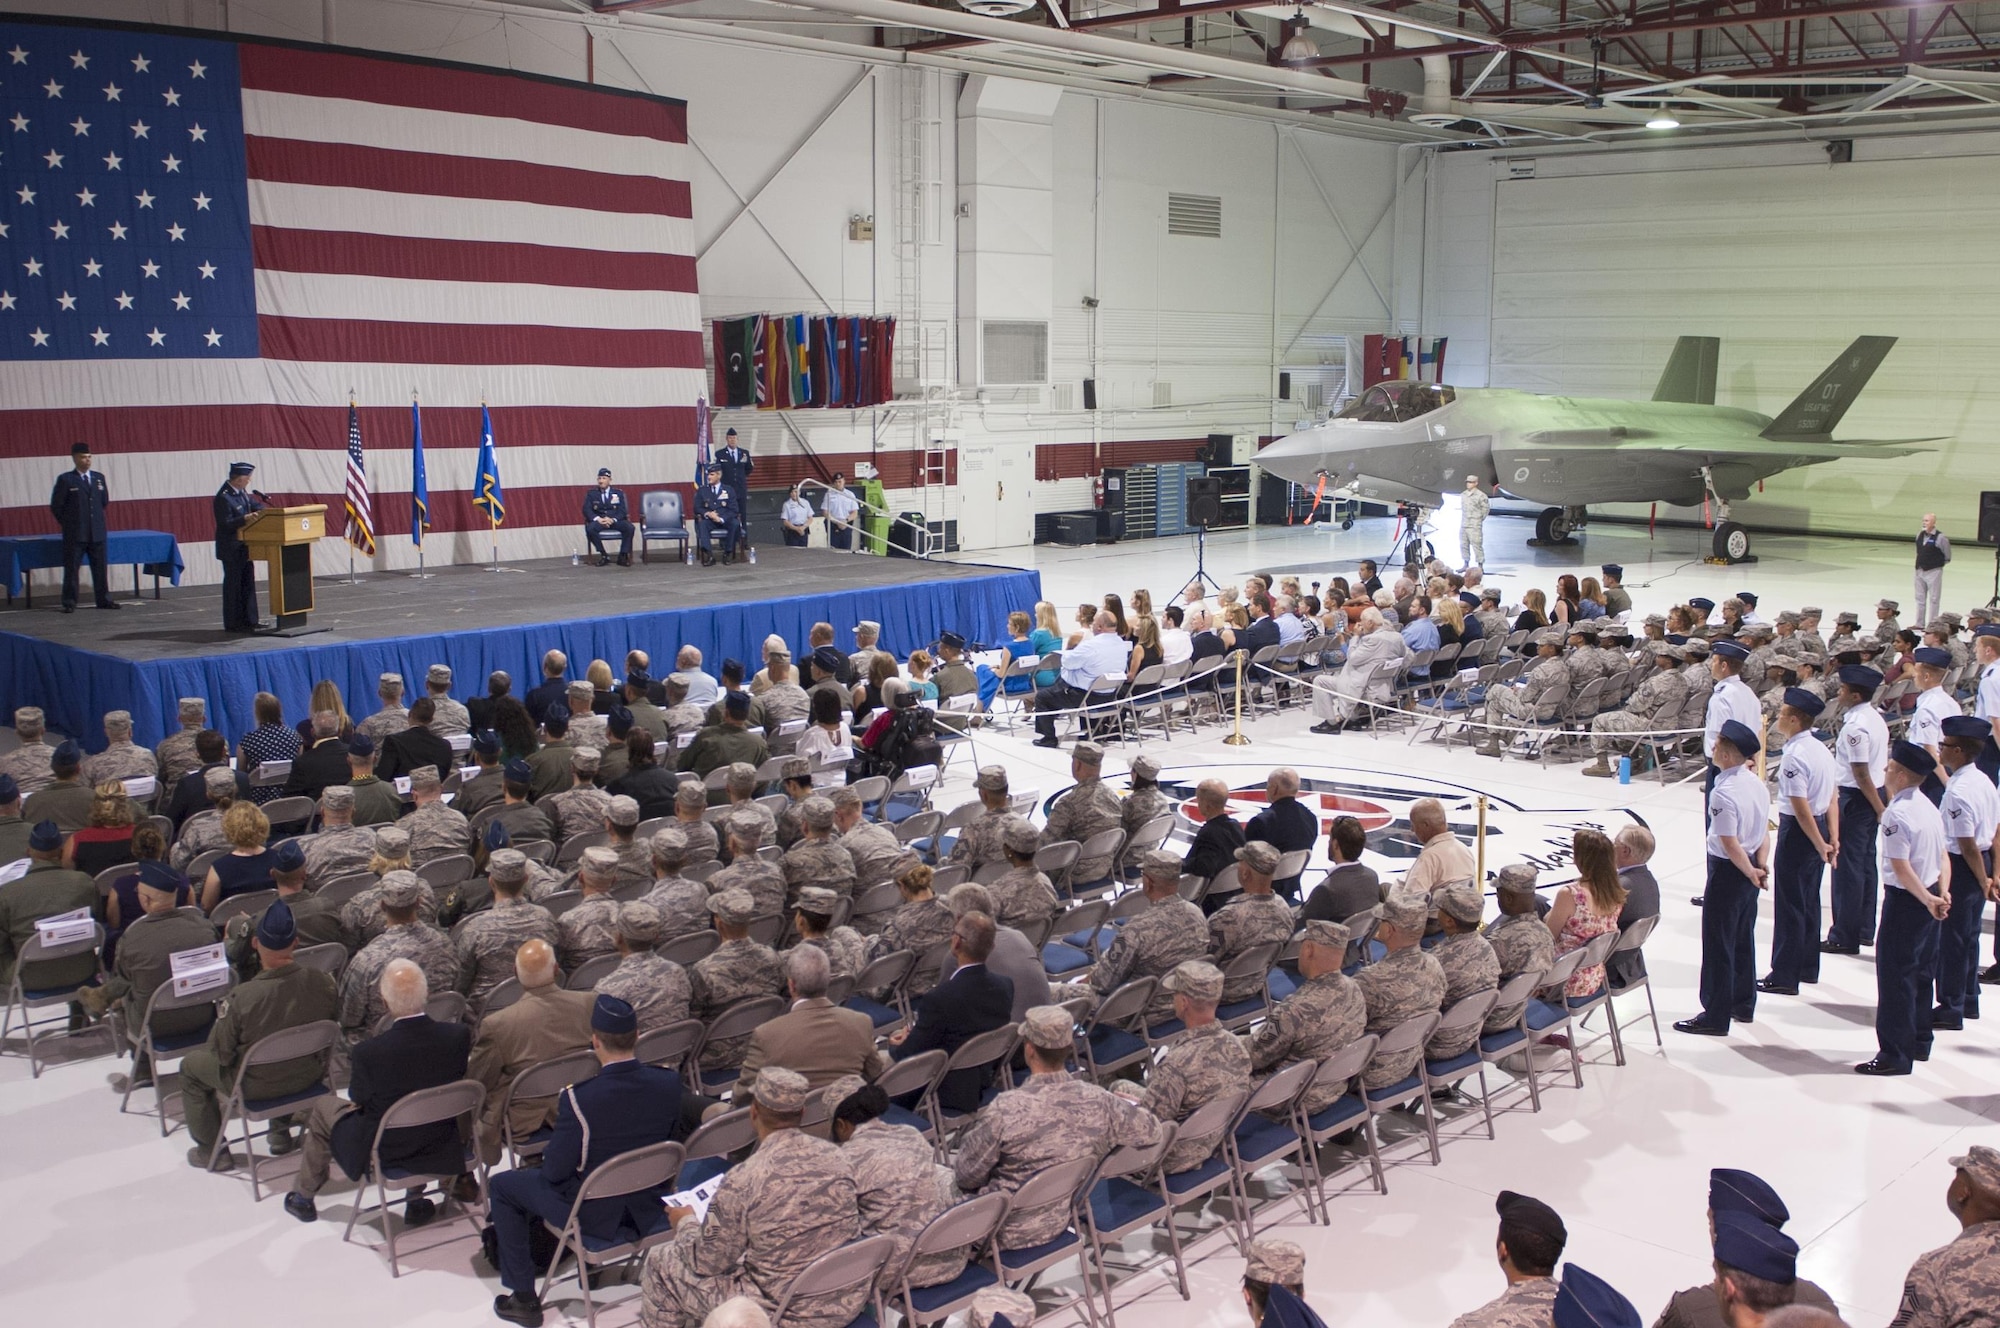 Airmen assigned to various units across Nellis Air Force Base, Nev., attend a U.S. Air Force Warfare Center change of command ceremony July 13, 2017. During the ceremony, USAFWC command was transferred from Maj. Gen. Glen VanHerck to Maj. Gen. Peter Gersten. (U.S. Air Force photo by Senior Airman Joshua Kleinholz) 